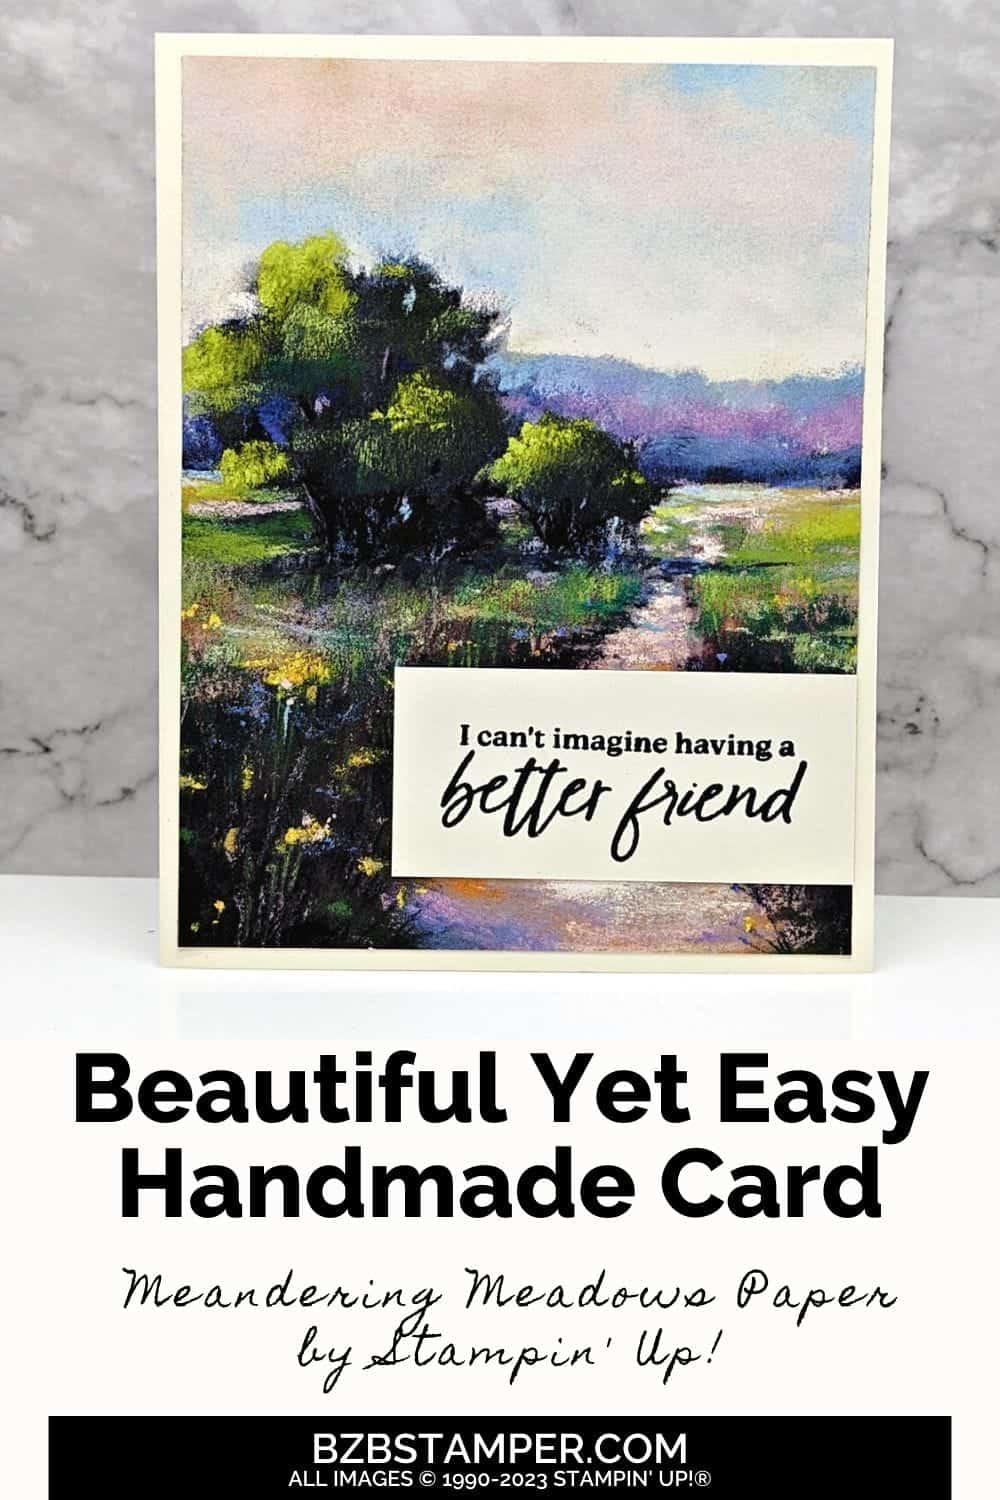 Quick and Easy Handmade Card featuring beautiful paper featuring a garden path scenery and a sentiment that says "I can't imagine having a better friend."